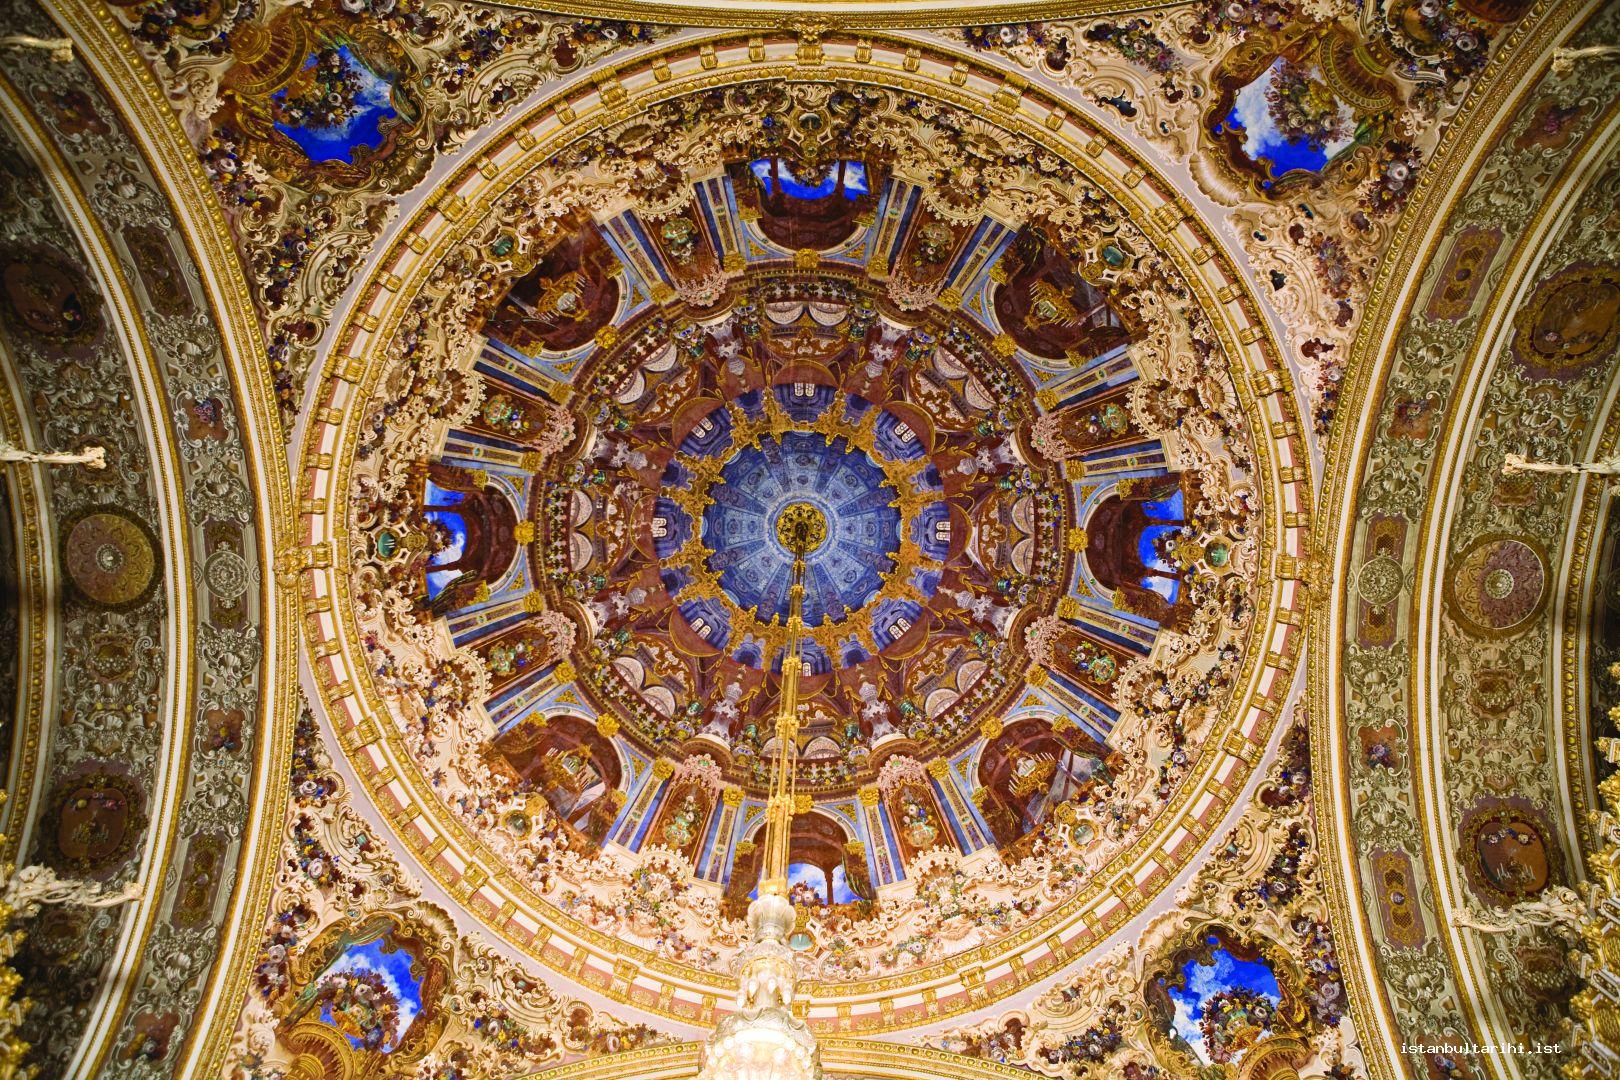 7- The dome of Muayede Hall in Dolmabahçe Palace